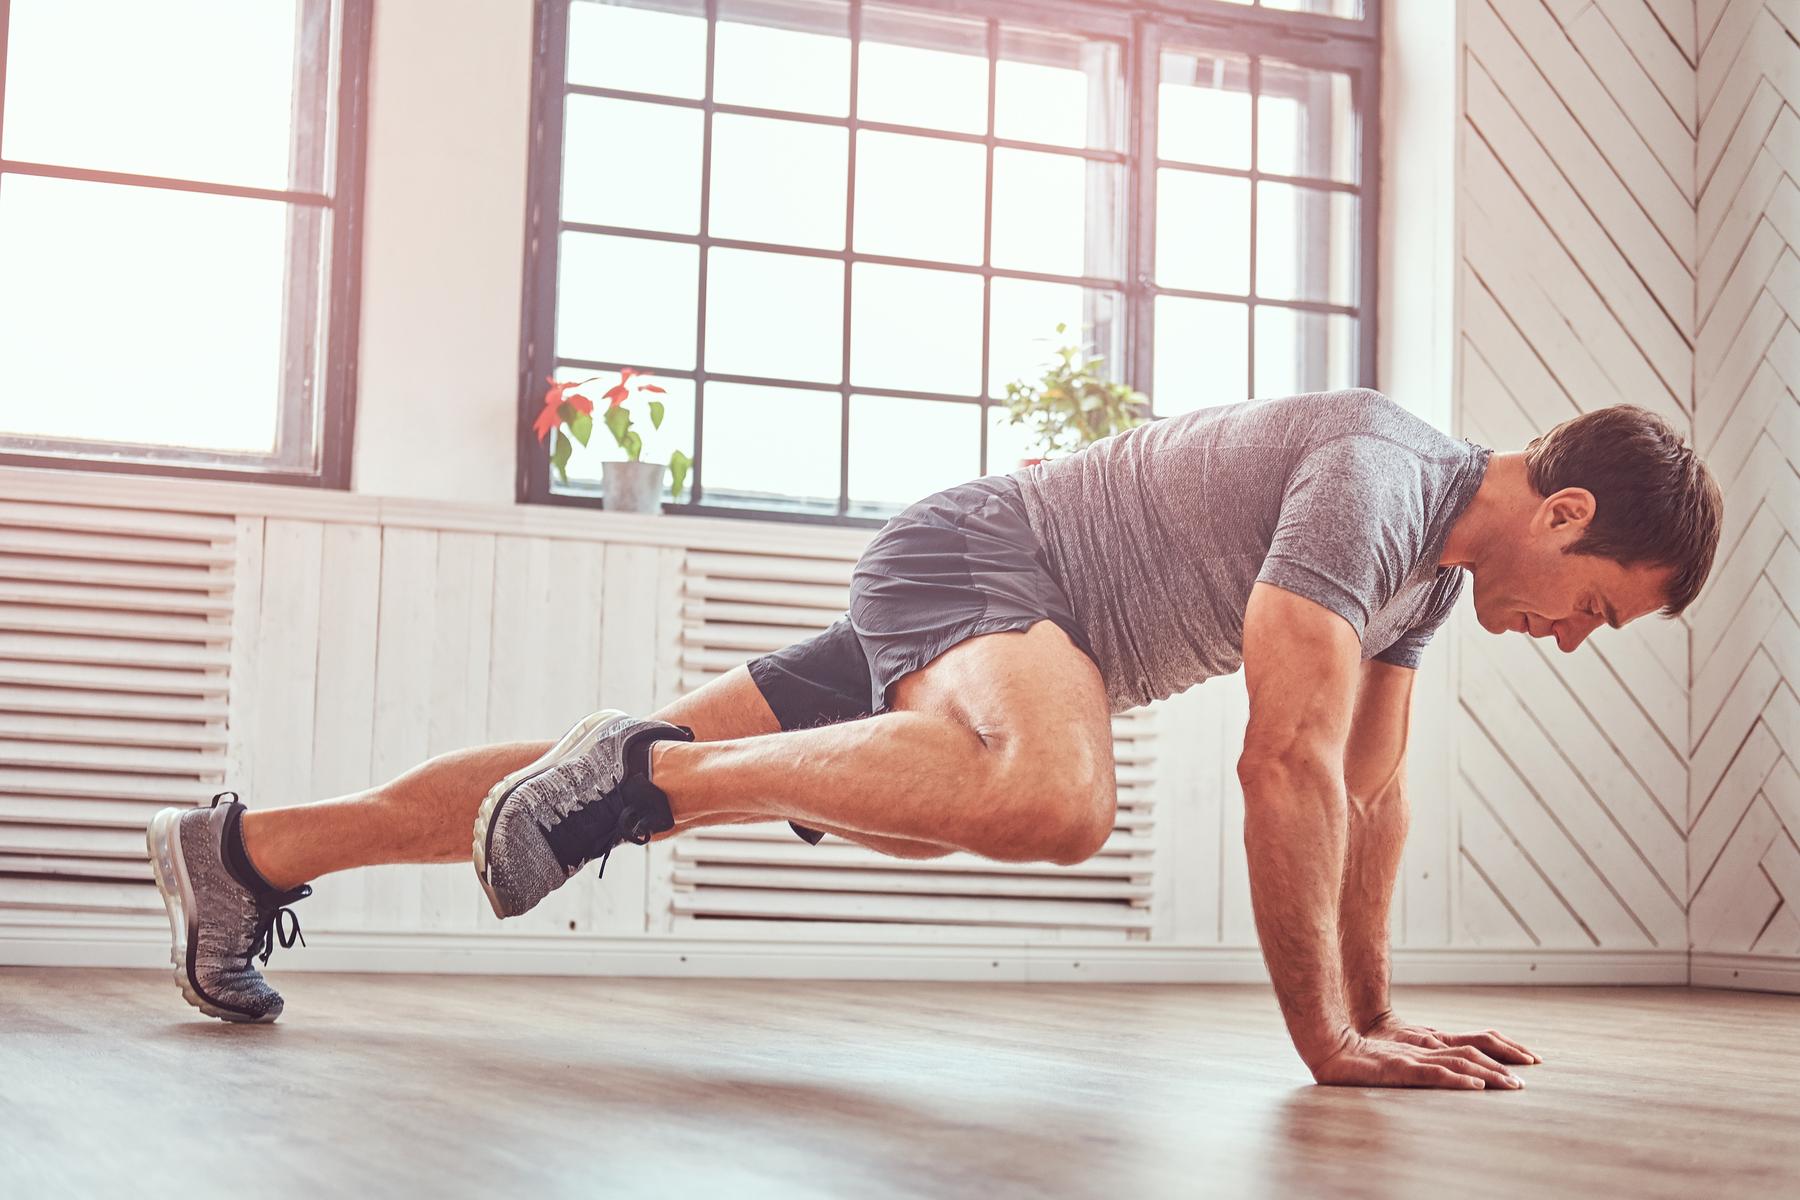 Can You Still Build Muscle With Just Bodyweight Training? - MYPROTEIN™